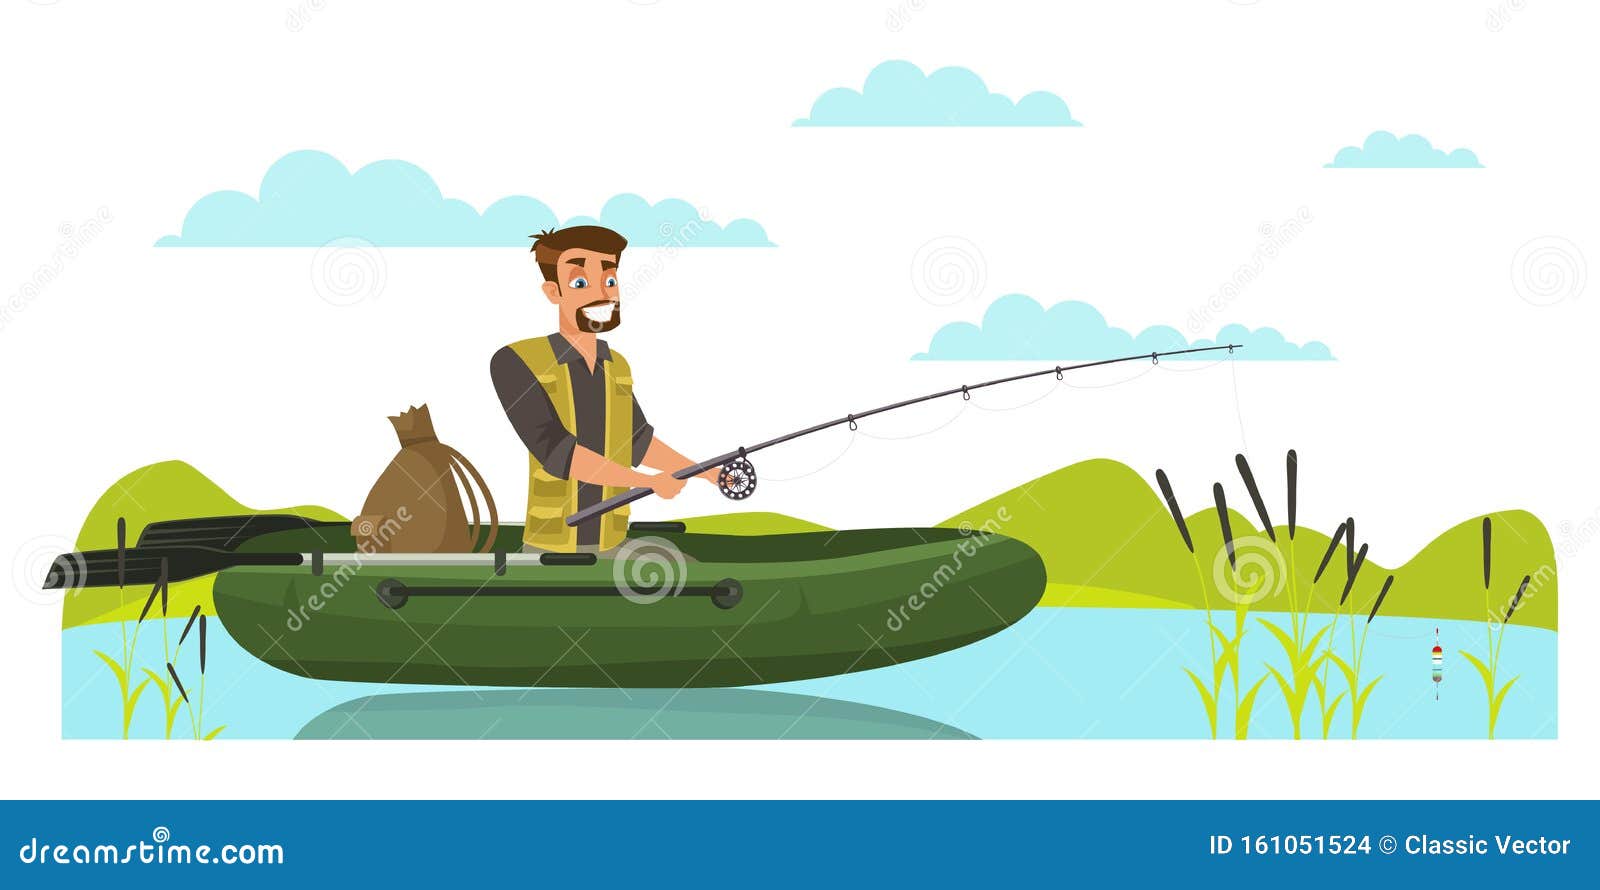 Download Man Fishing In Rubber Boat Vector Illustration Stock ...